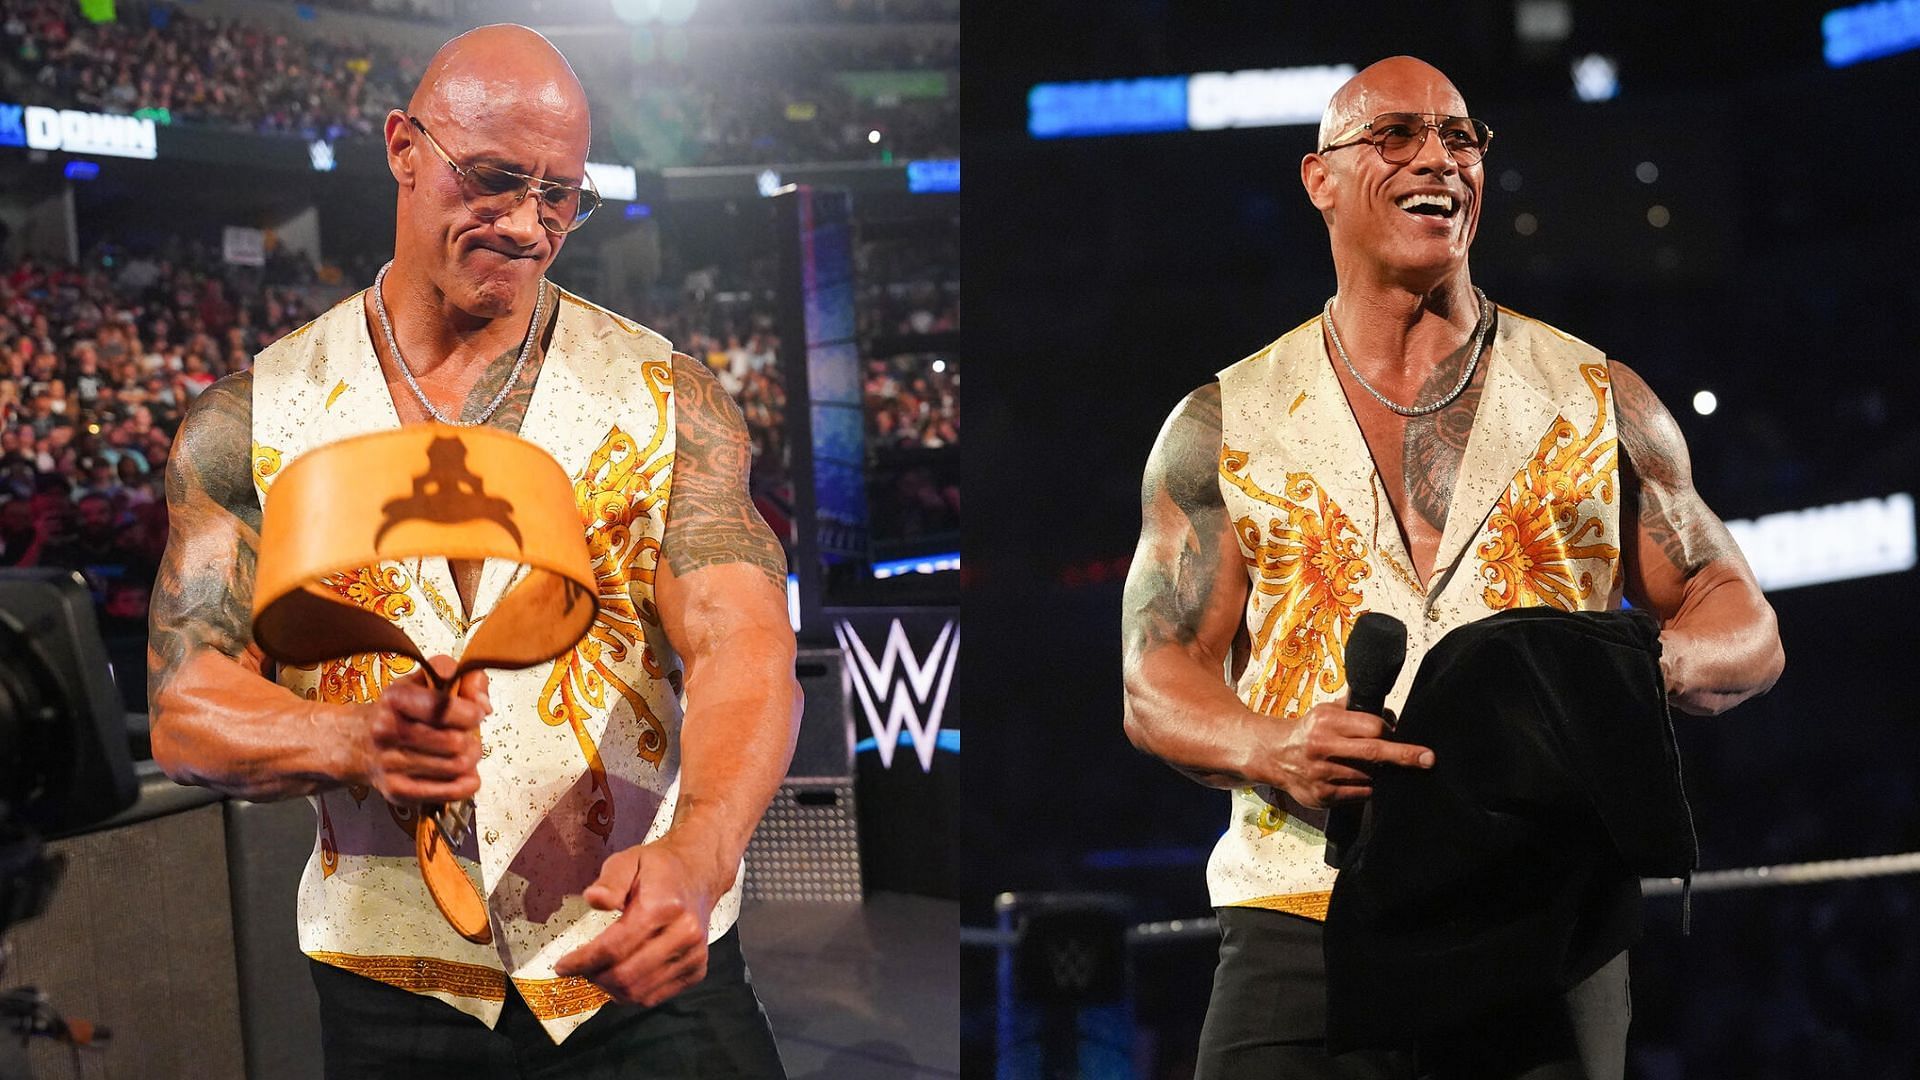 What does The Rock plan to do at WrestleMania?